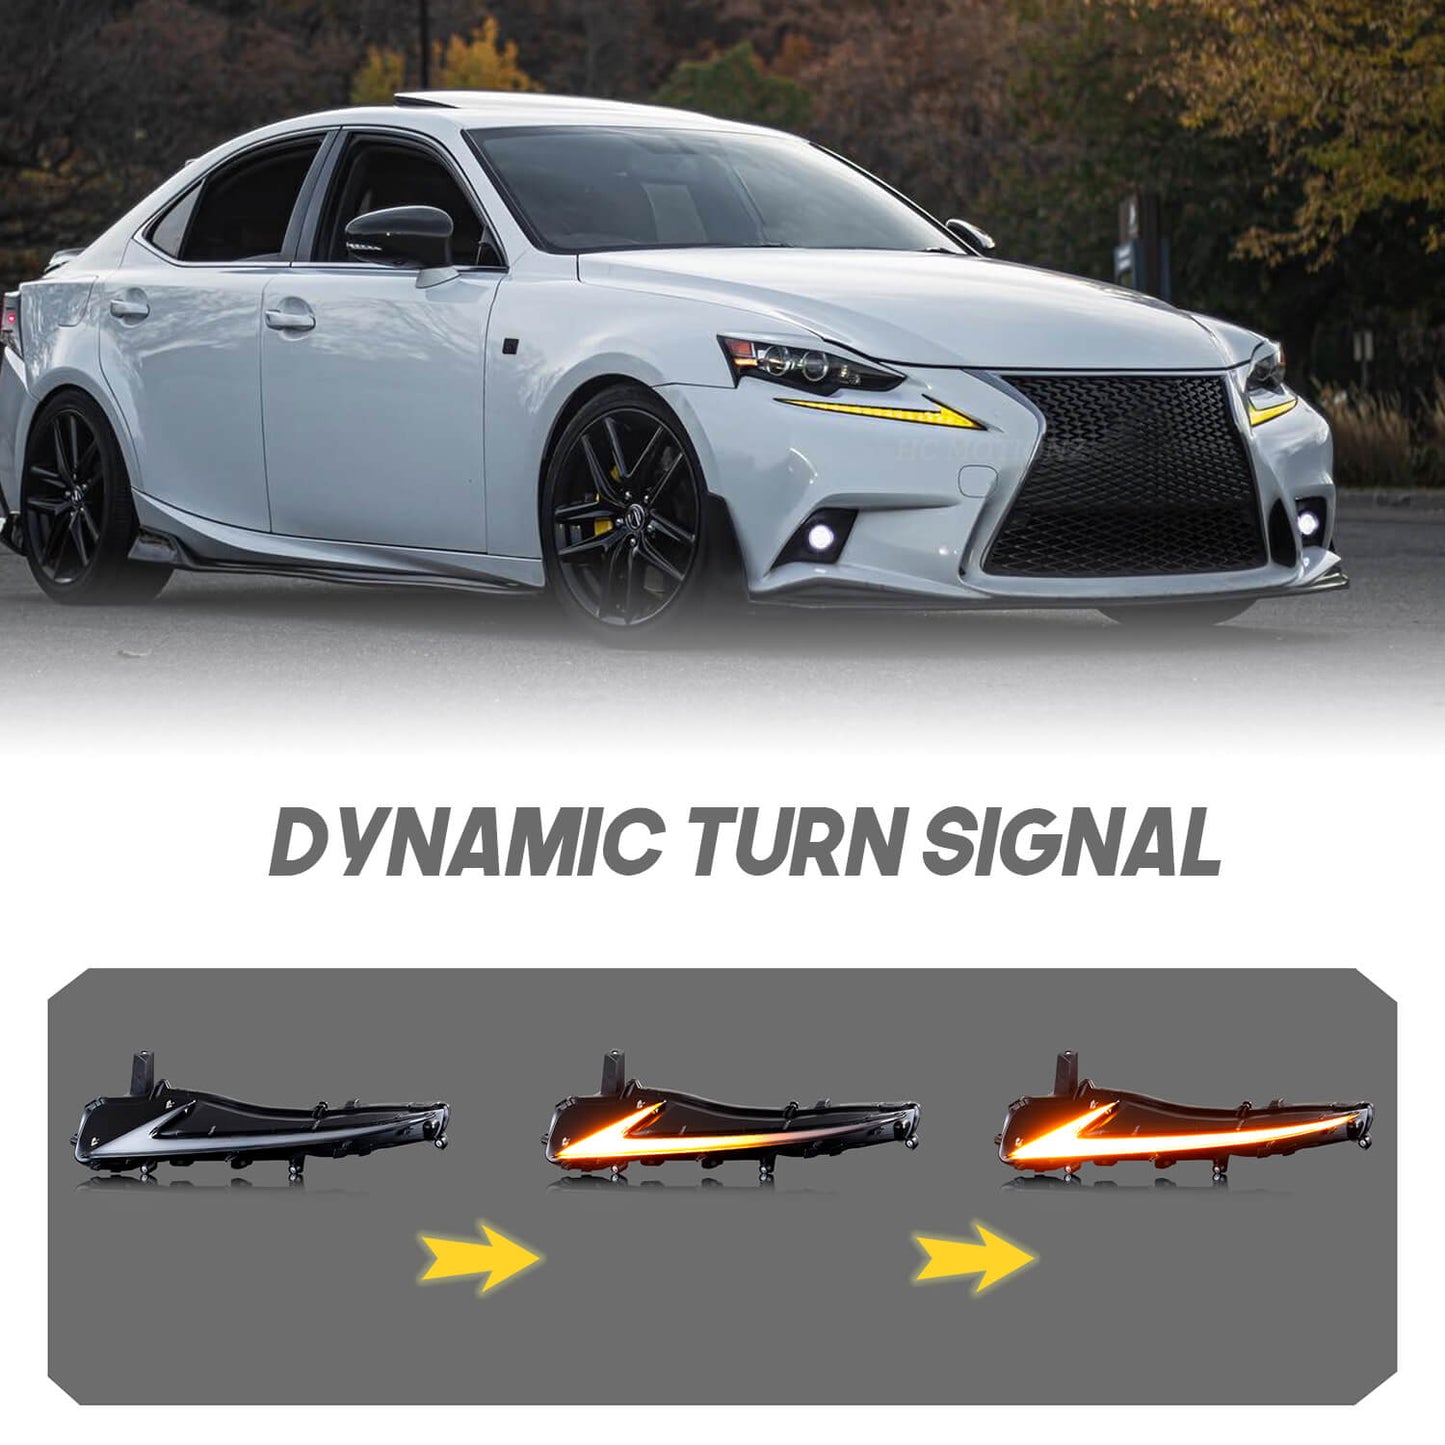 HCMOTION LED Headlight For Lexus IS250 300h 350f 2013-2016